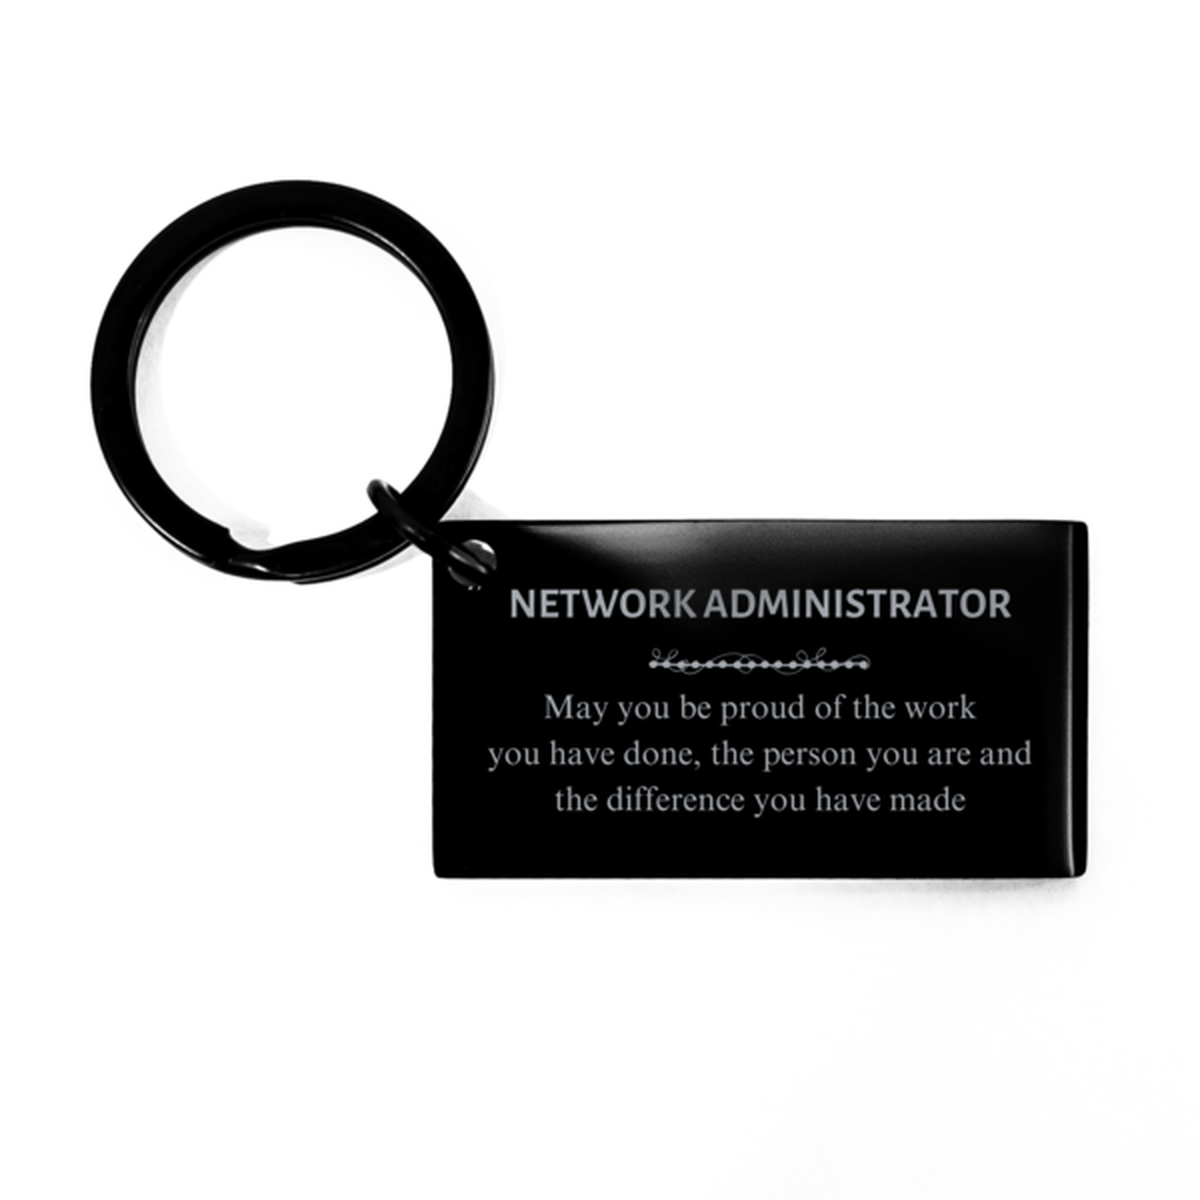 PE Teacher May you be proud of the work you have done, Retirement Network Administrator Keychain for Colleague Appreciation Gifts Amazing for Network Administrator